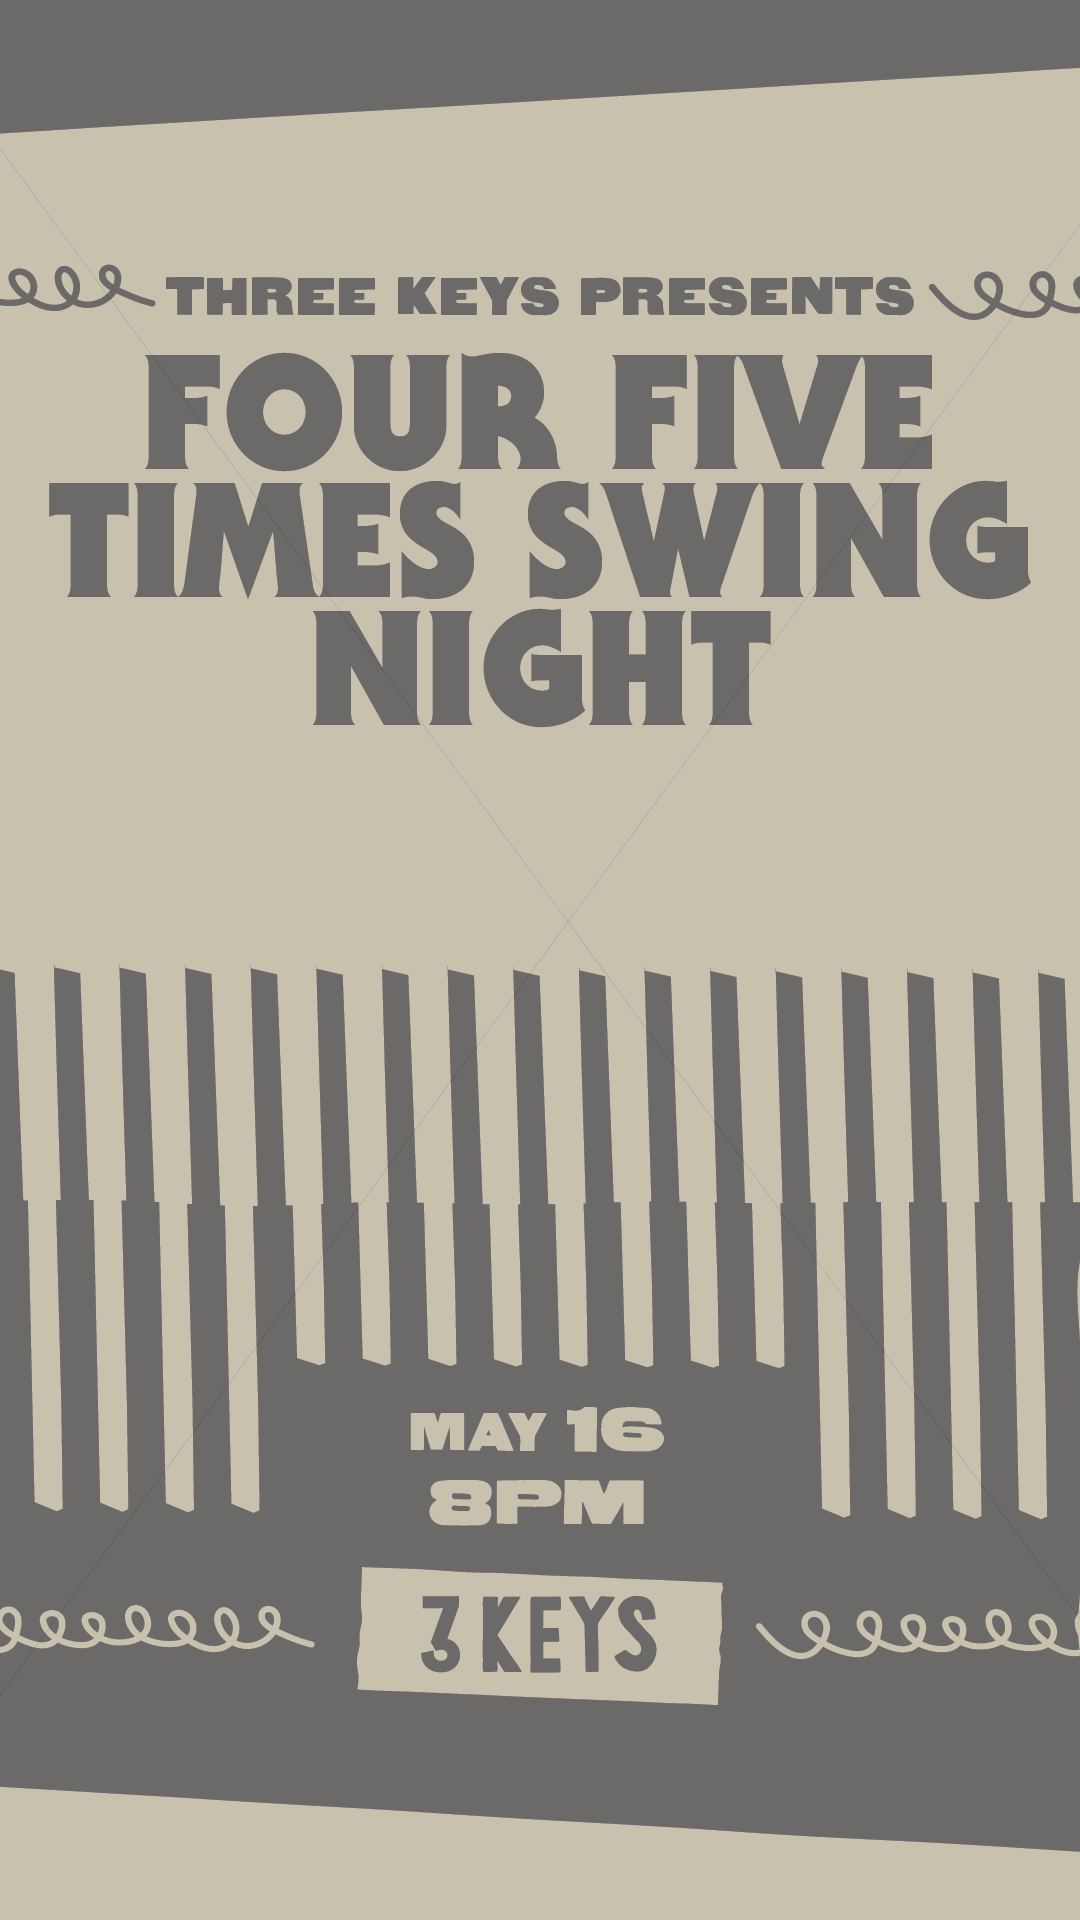 FOUR FIVE TIMES SWING NIGHT MAY 16